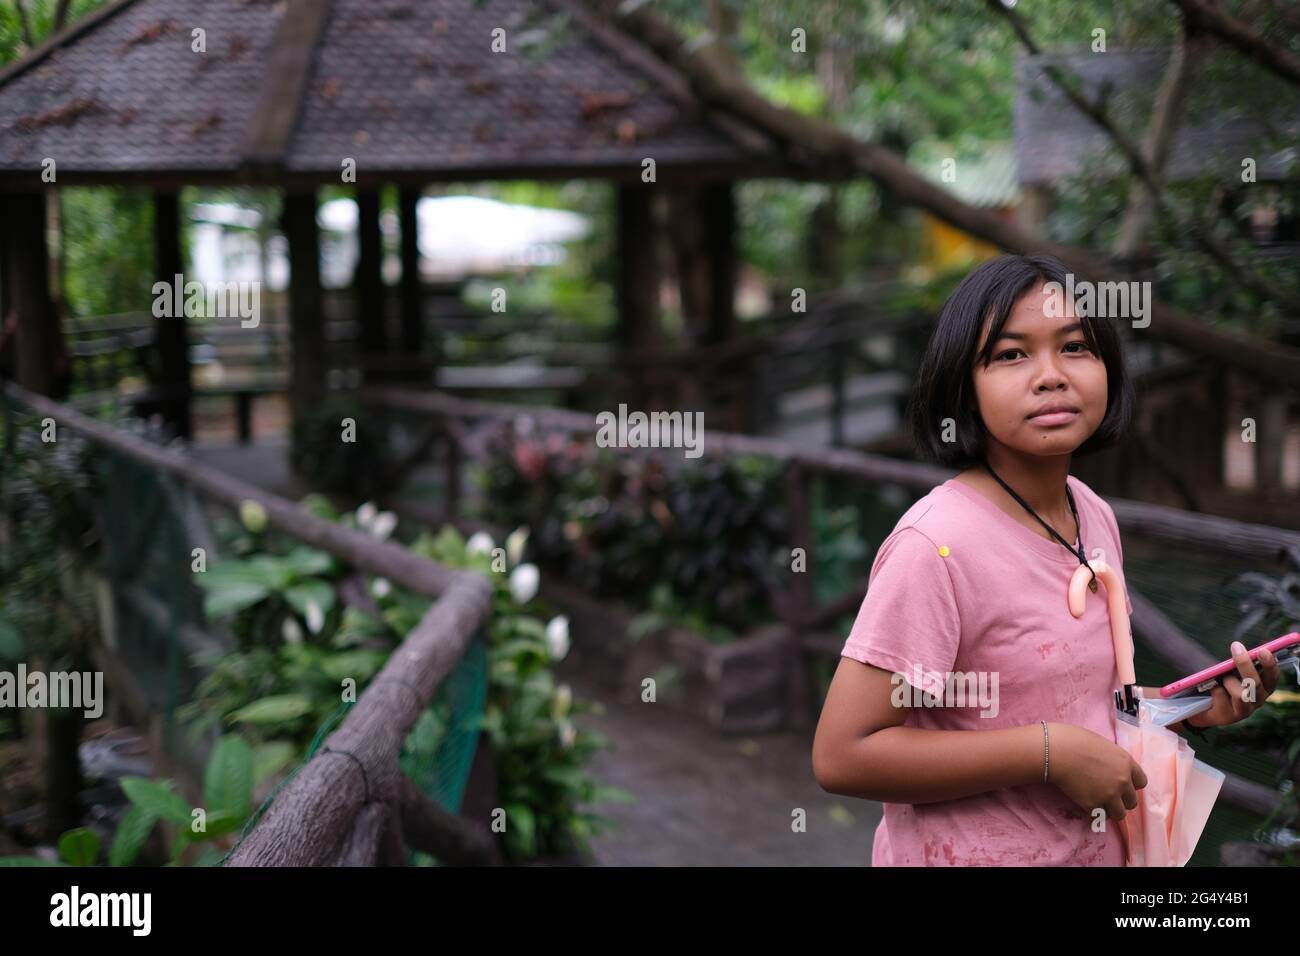 A teen Thai girl looking at camera while walking through garden with summer houses and wooden footpath after rain Stock Photo